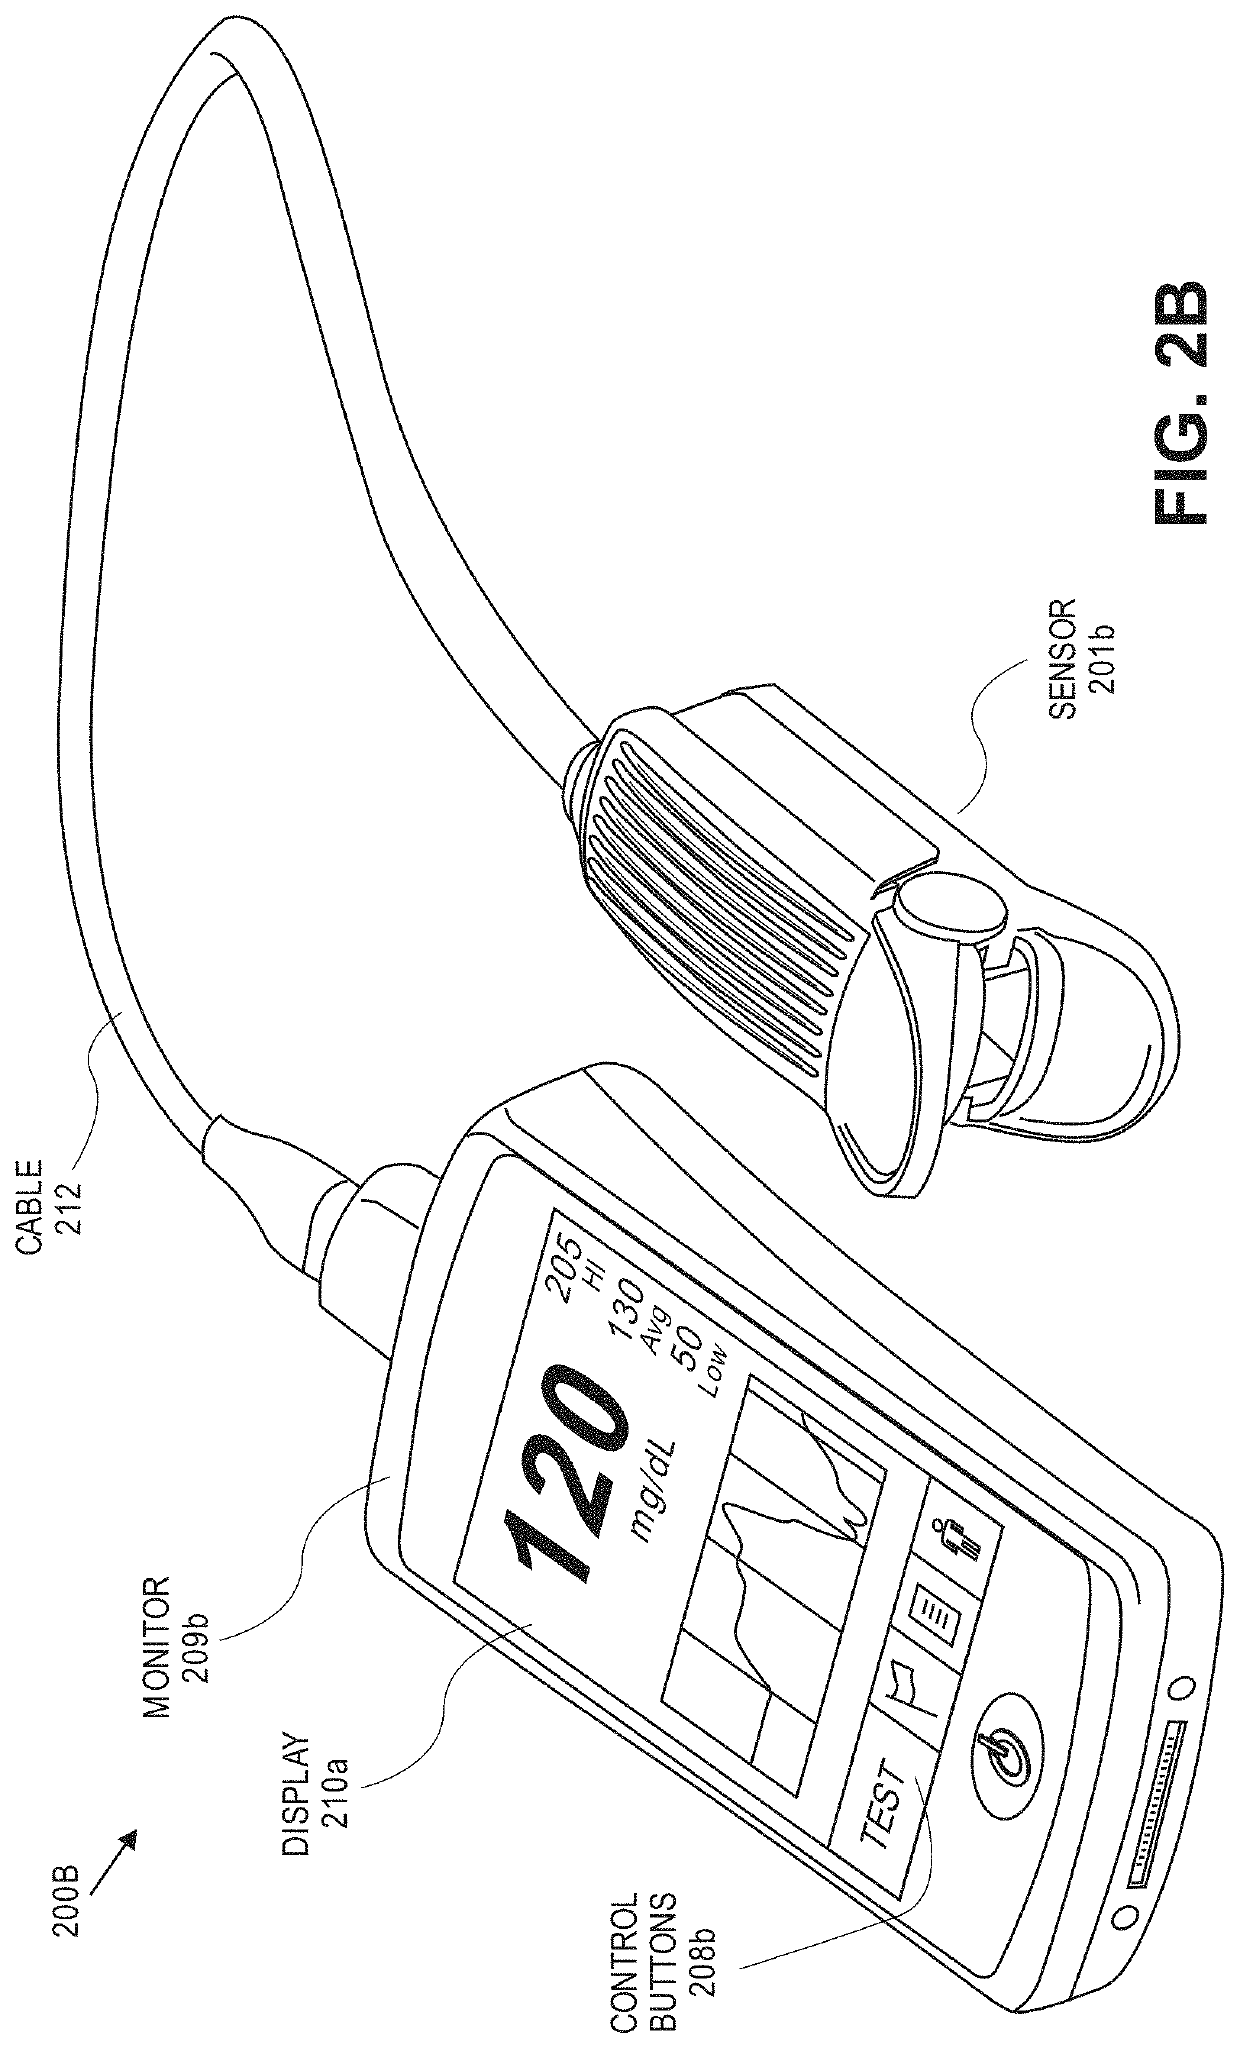 User-worn device for noninvasively measuring a physiological parameter of a user